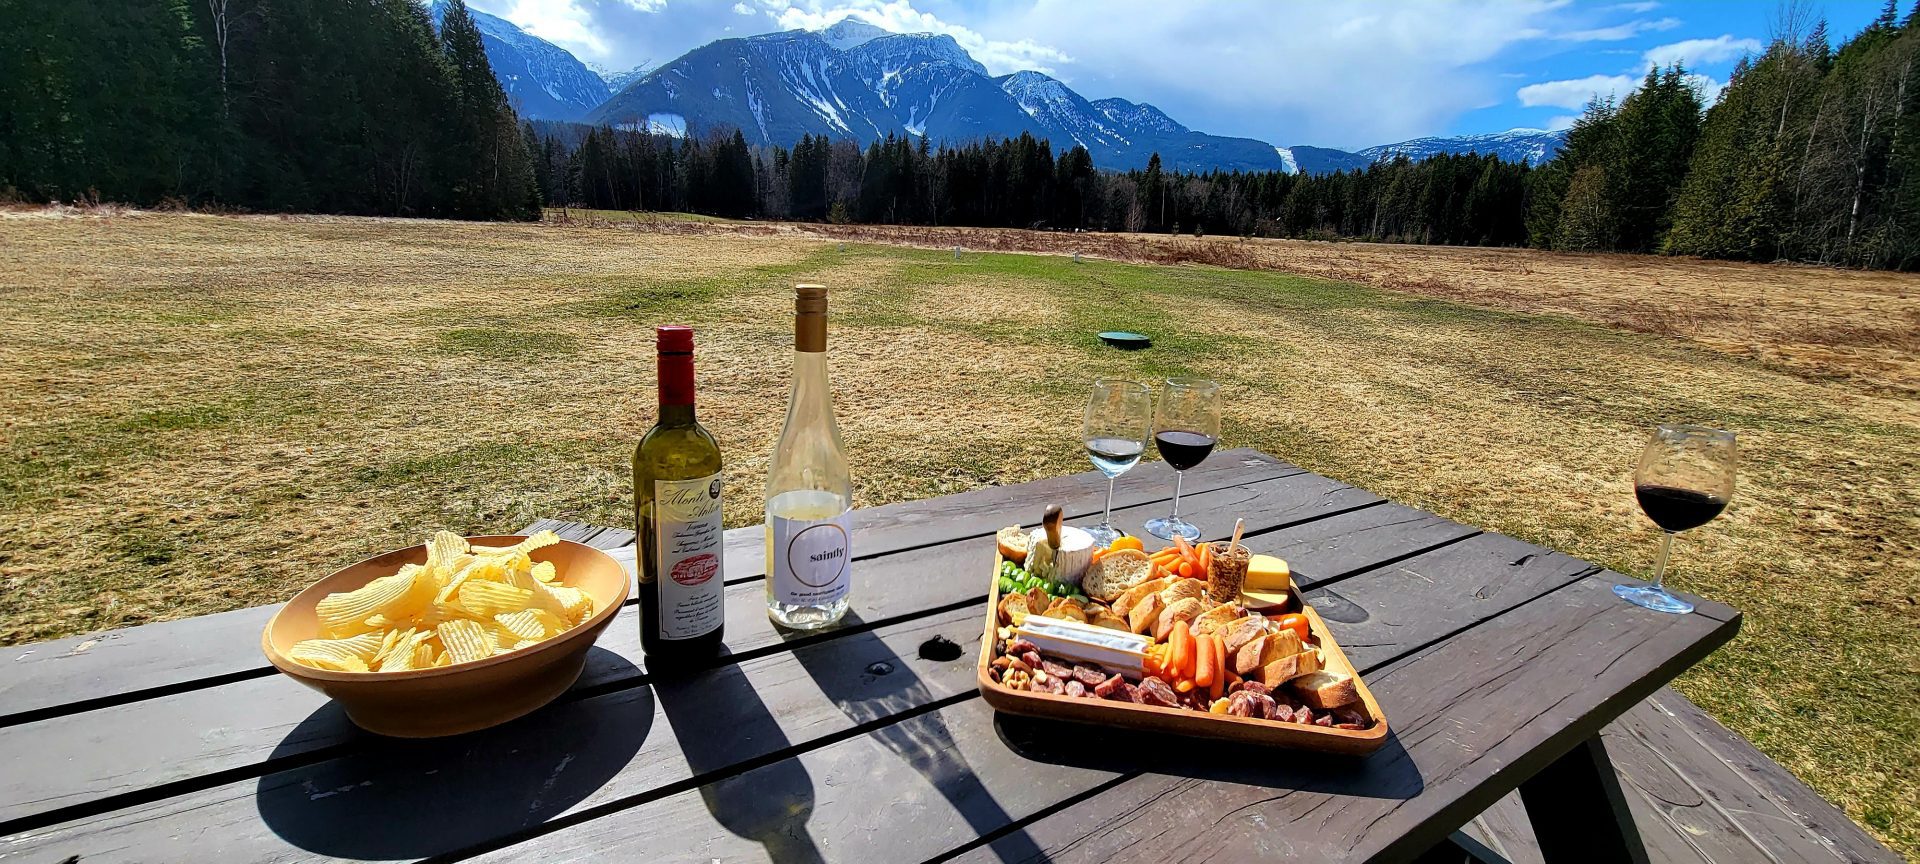 10 Ways to Make the Most of your Stay at Revelstoke House